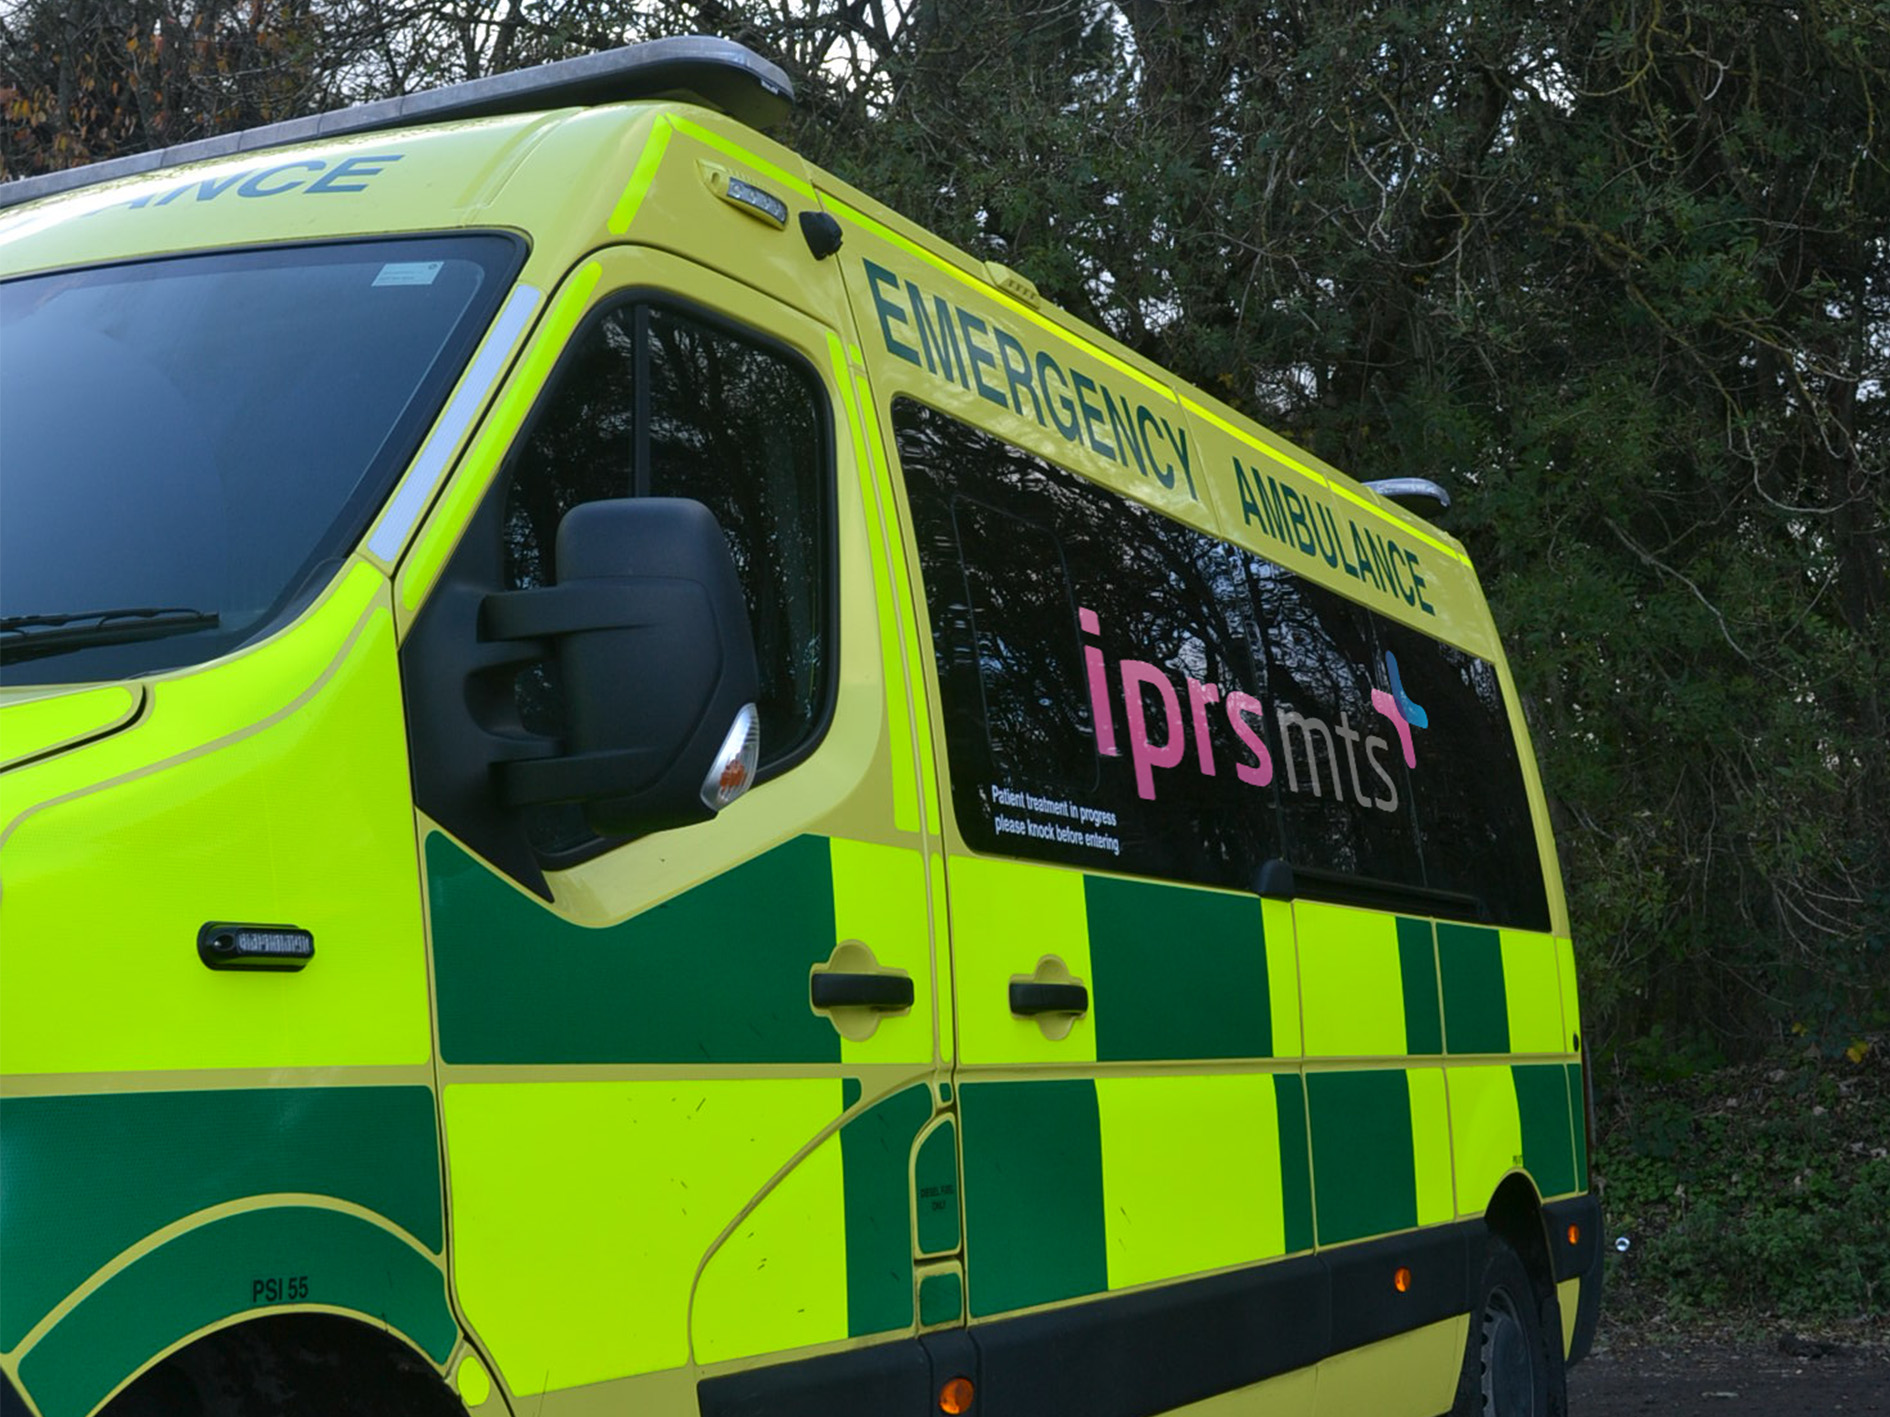 Specialist Patient Transport Provider IPRS MTS Expands with New Offices just 5 months after Launch